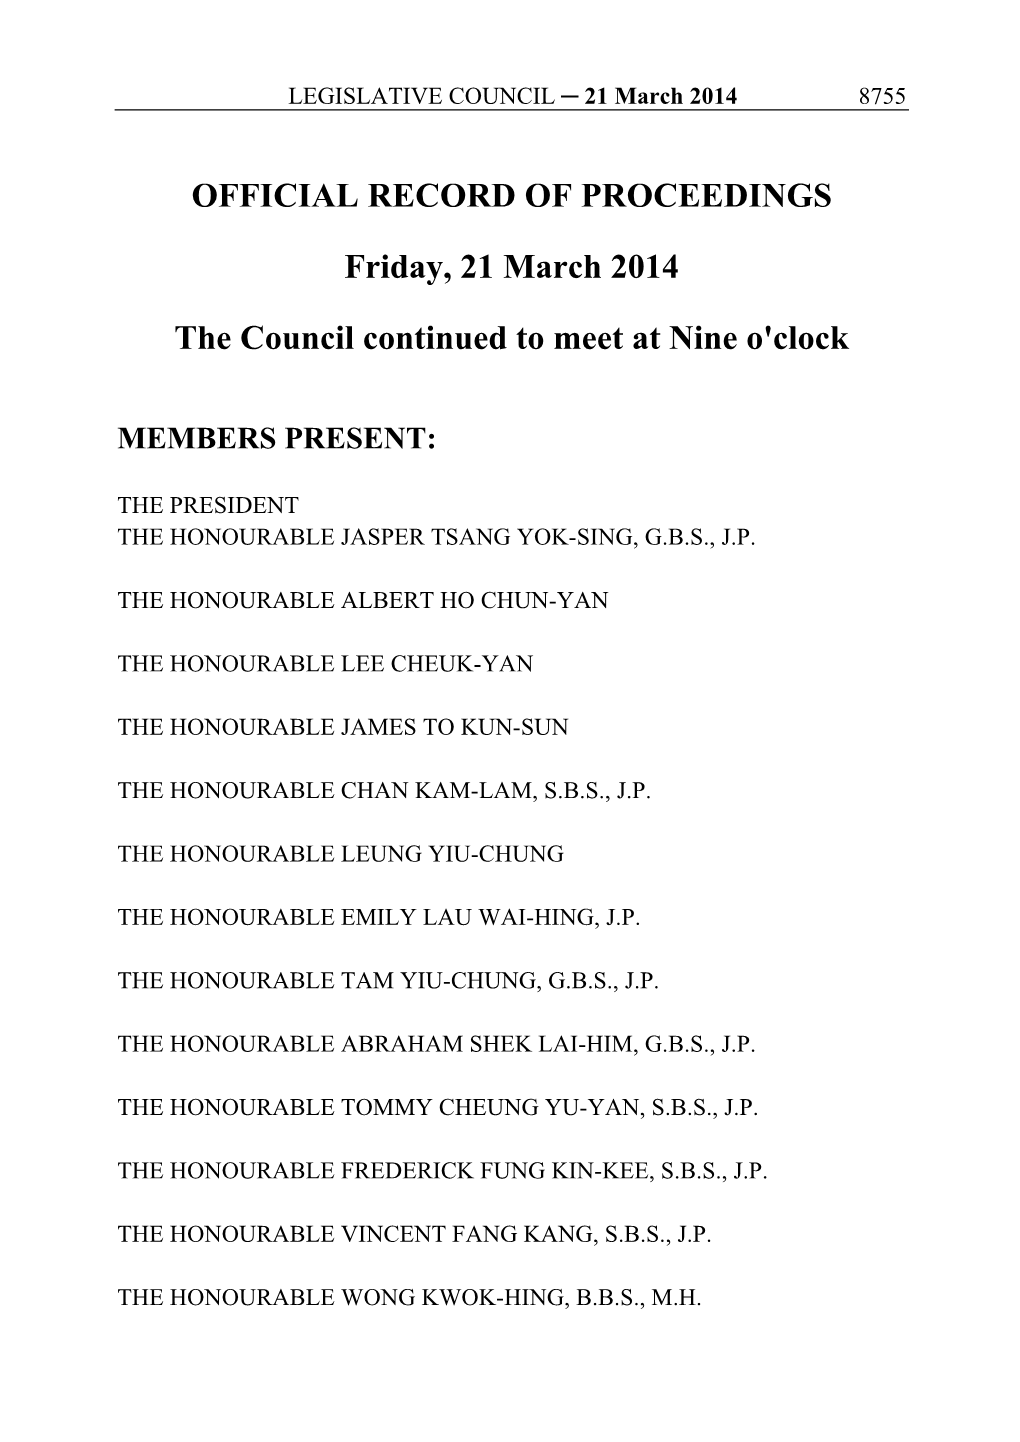 OFFICIAL RECORD of PROCEEDINGS Friday, 21 March